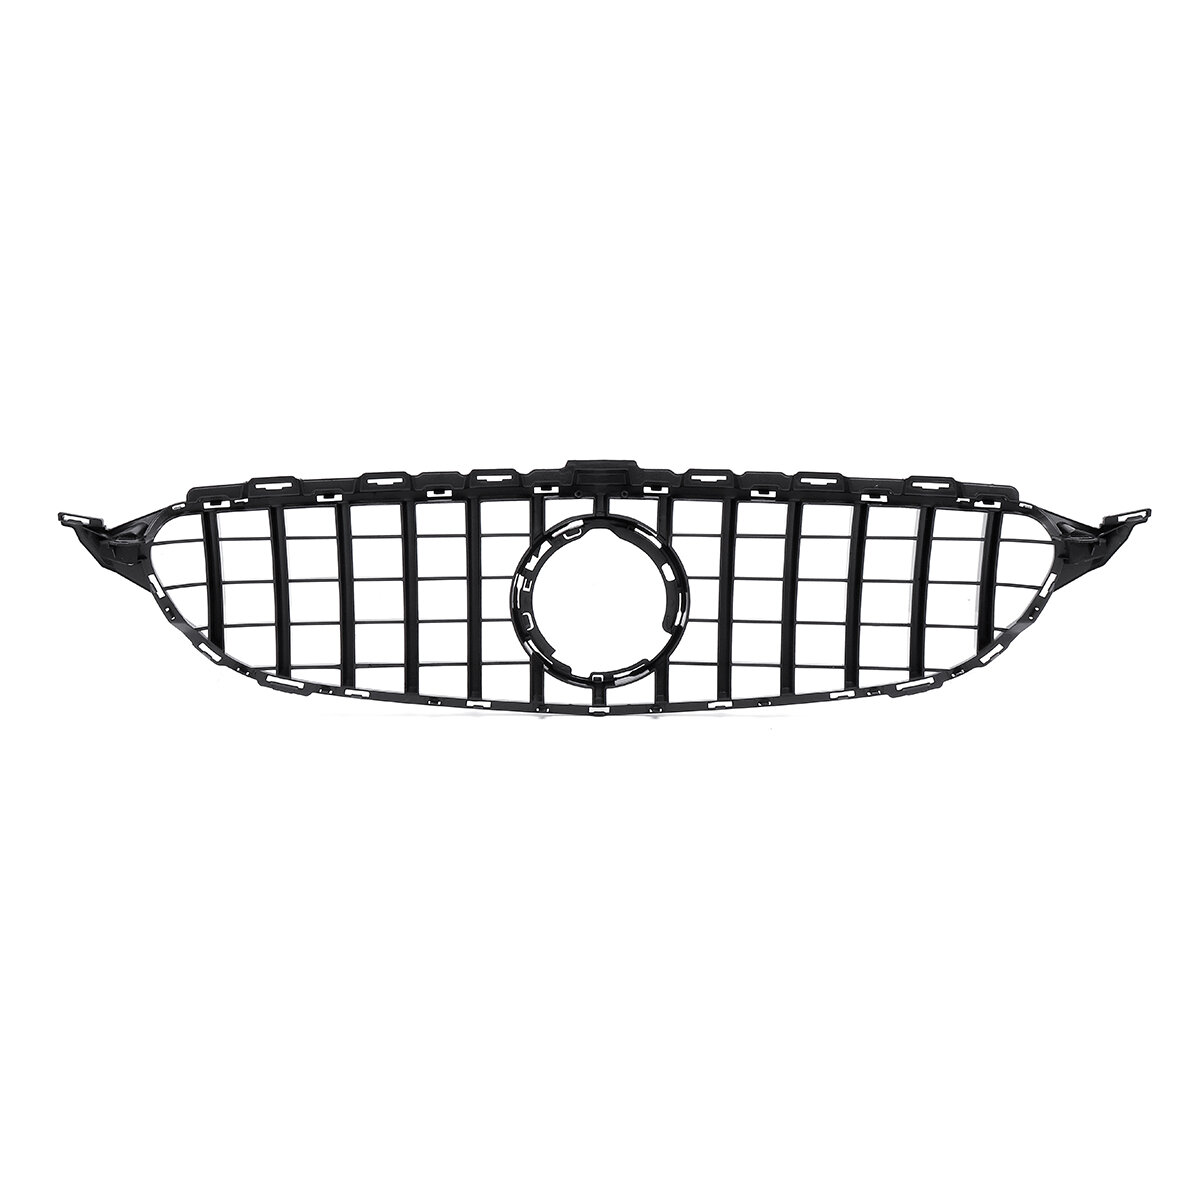 

GT R AMG Style Grill Grille Front Bumper for Mercedes Benz W205 C250 C300 2019